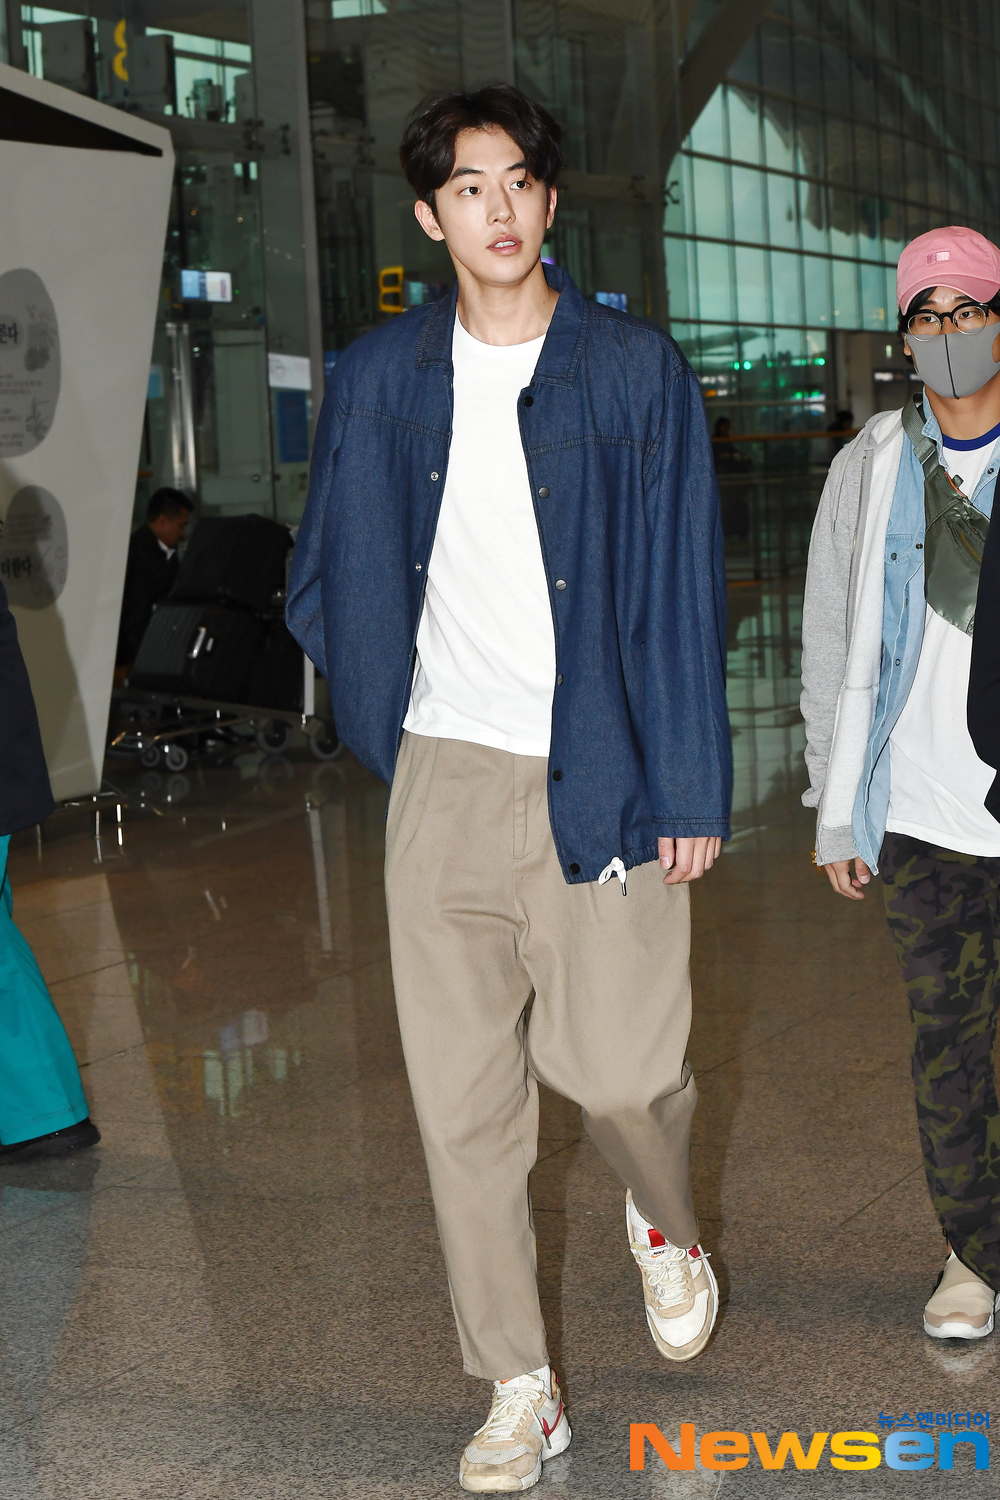 Actor Nam Joo-hyuk departed for Thailand Bangkok on April 10th to attend an overseas schedule through the Incheon International Airport in Unseo-dong, Jung-gu, Incheon.Actor Nam Joo-hyuk is leaving for Thailand Bangkok, presenting airport fashion.exponential earthquake